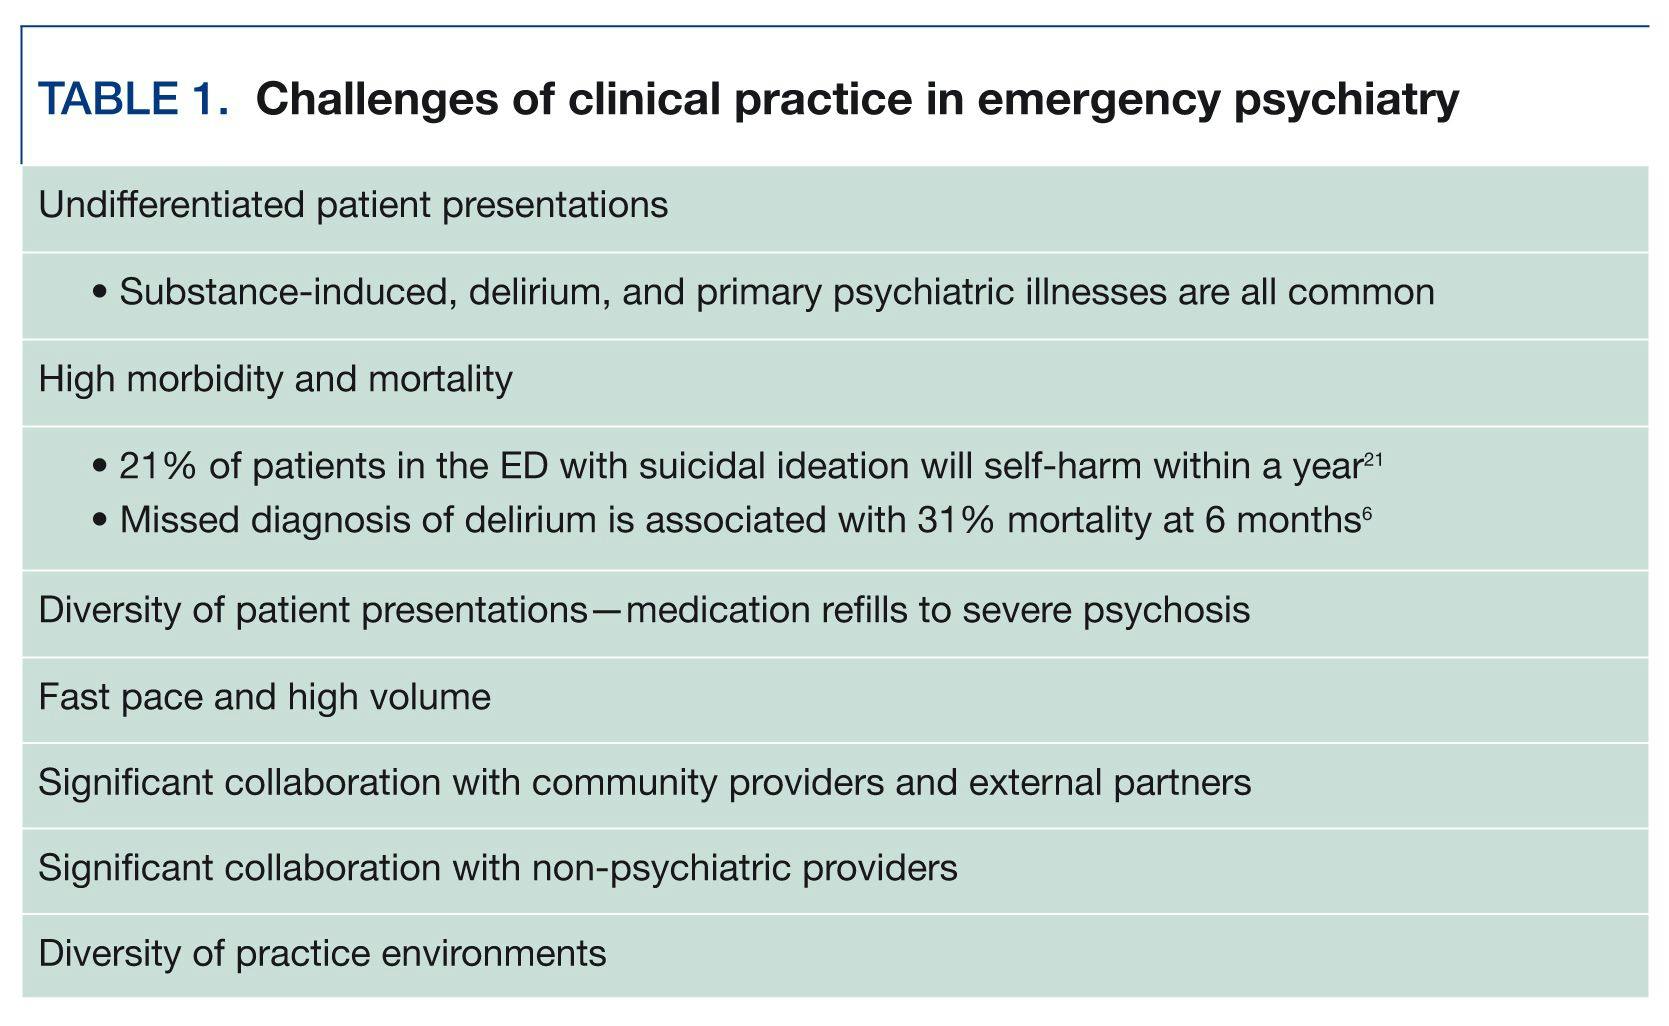 Challenges of clinical practice in emergency psychiatry